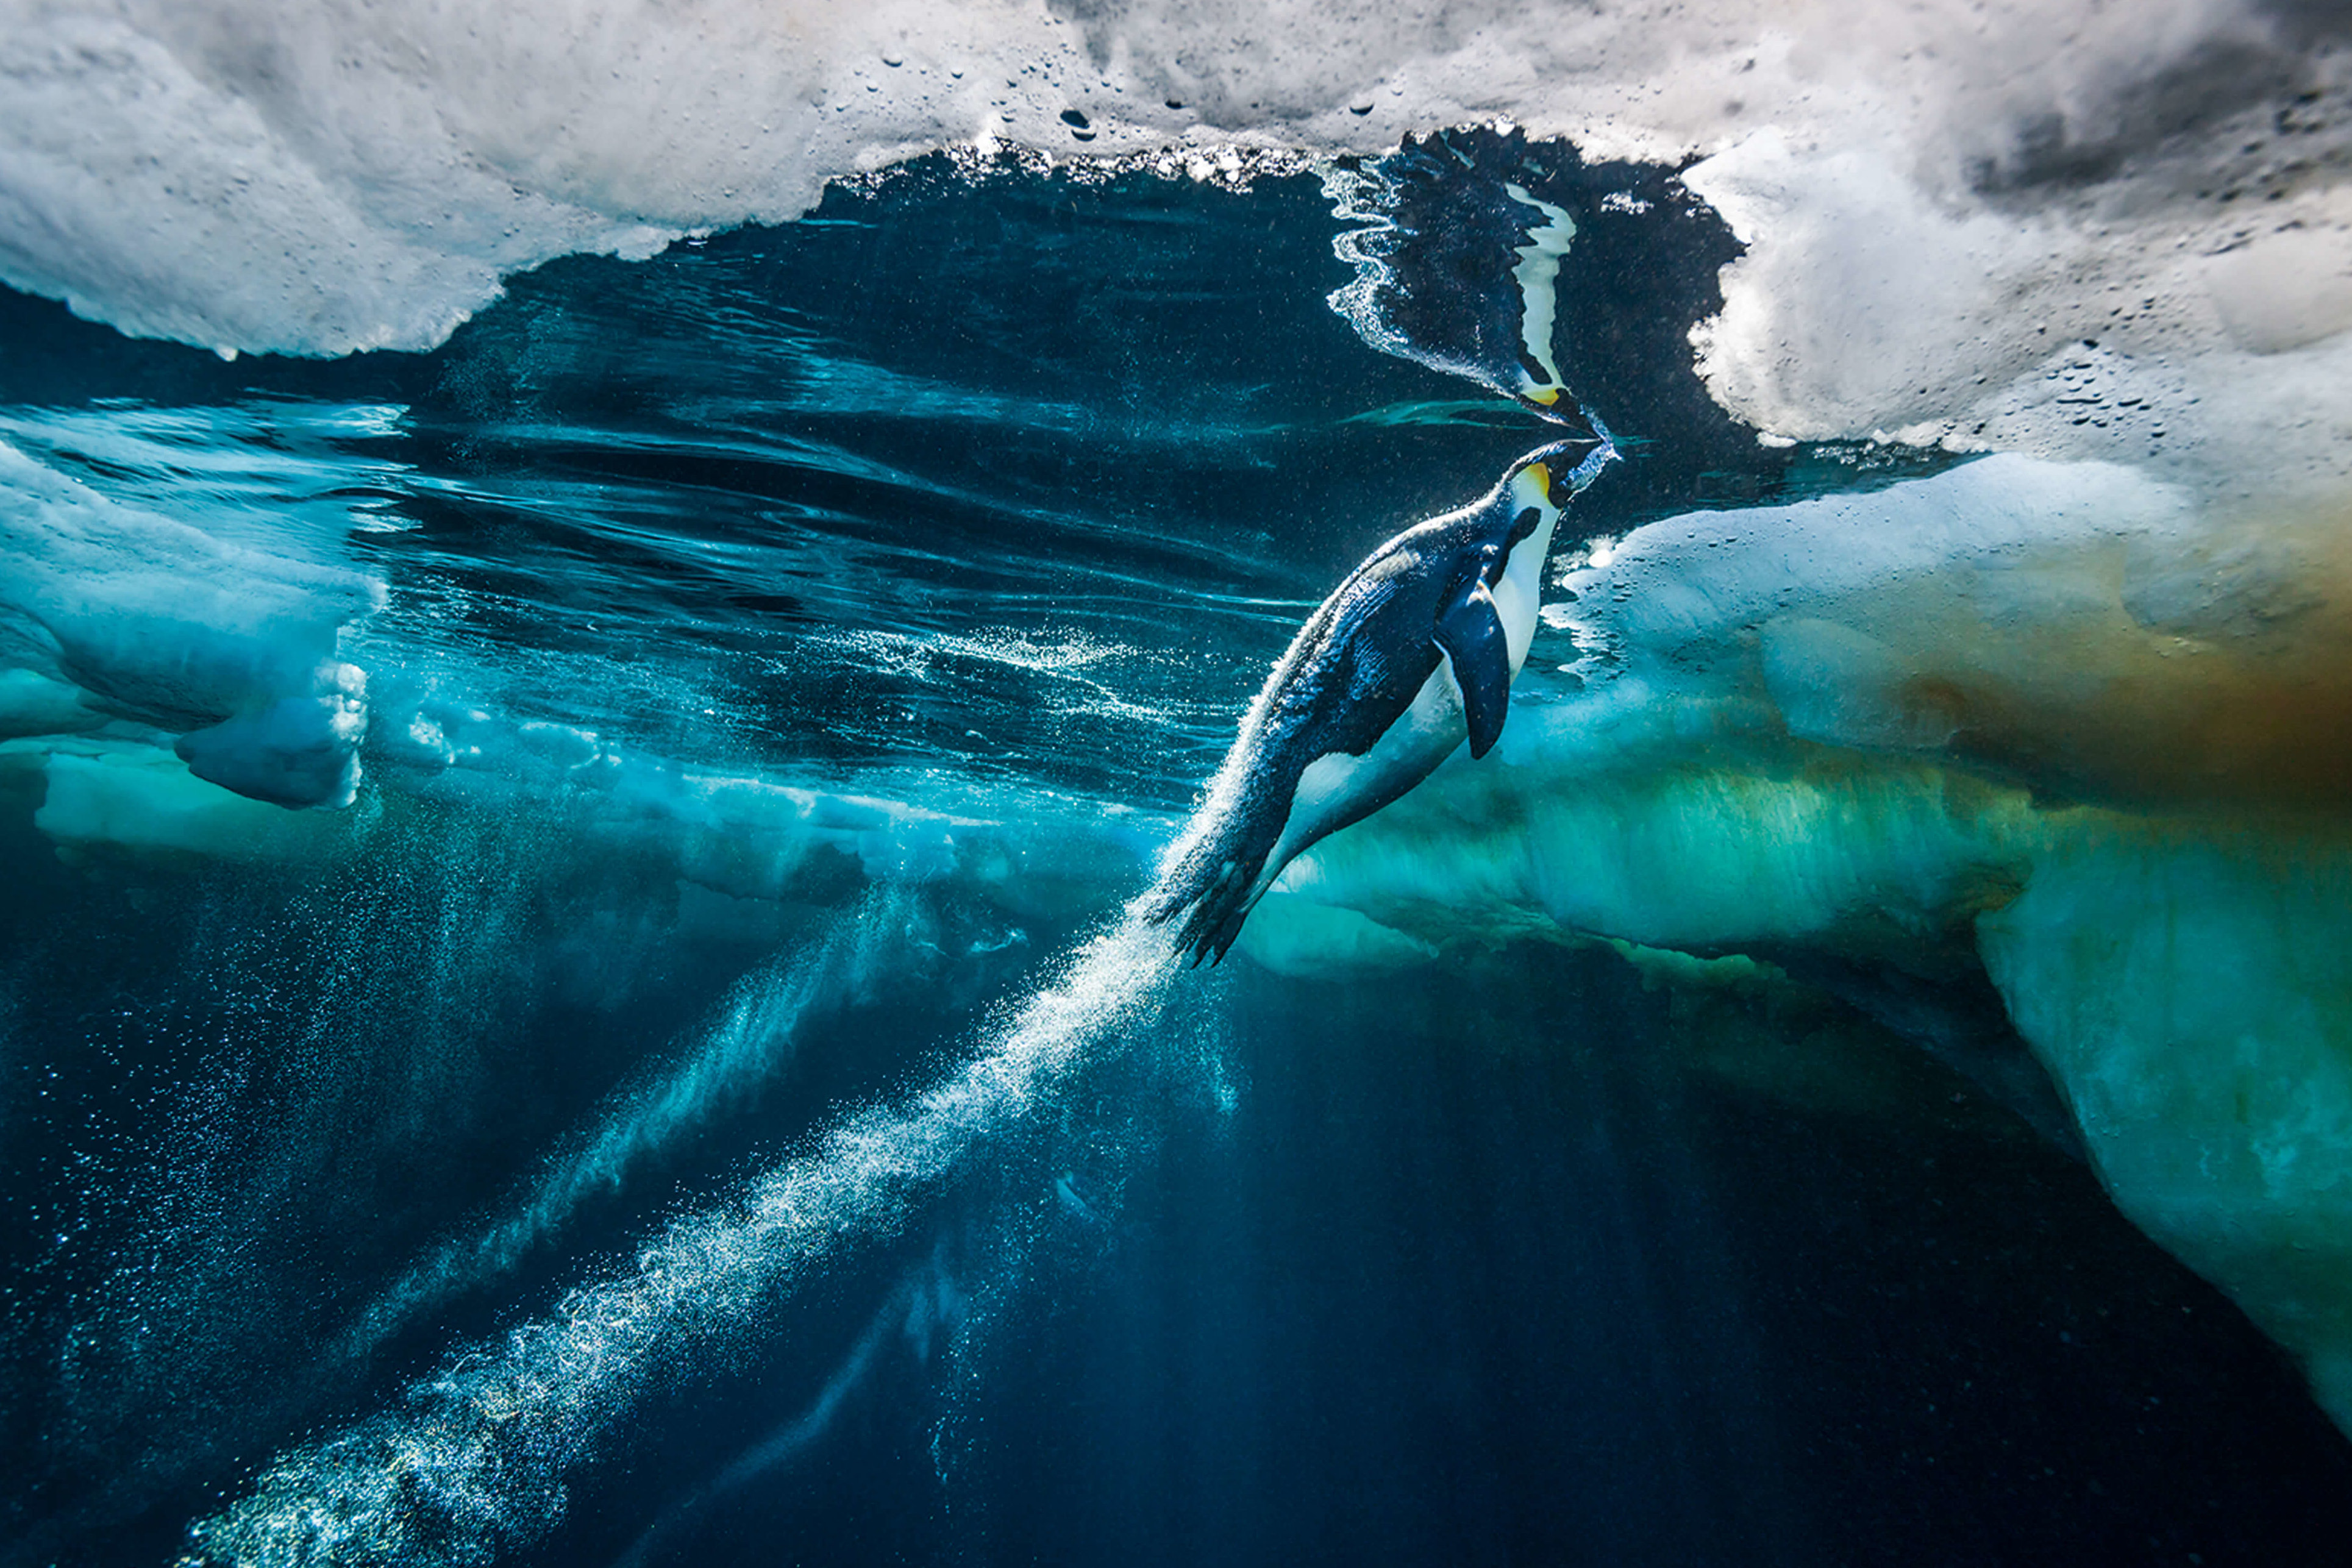 Photographer Paul Nicklen on his love affair with the Arctic landscape